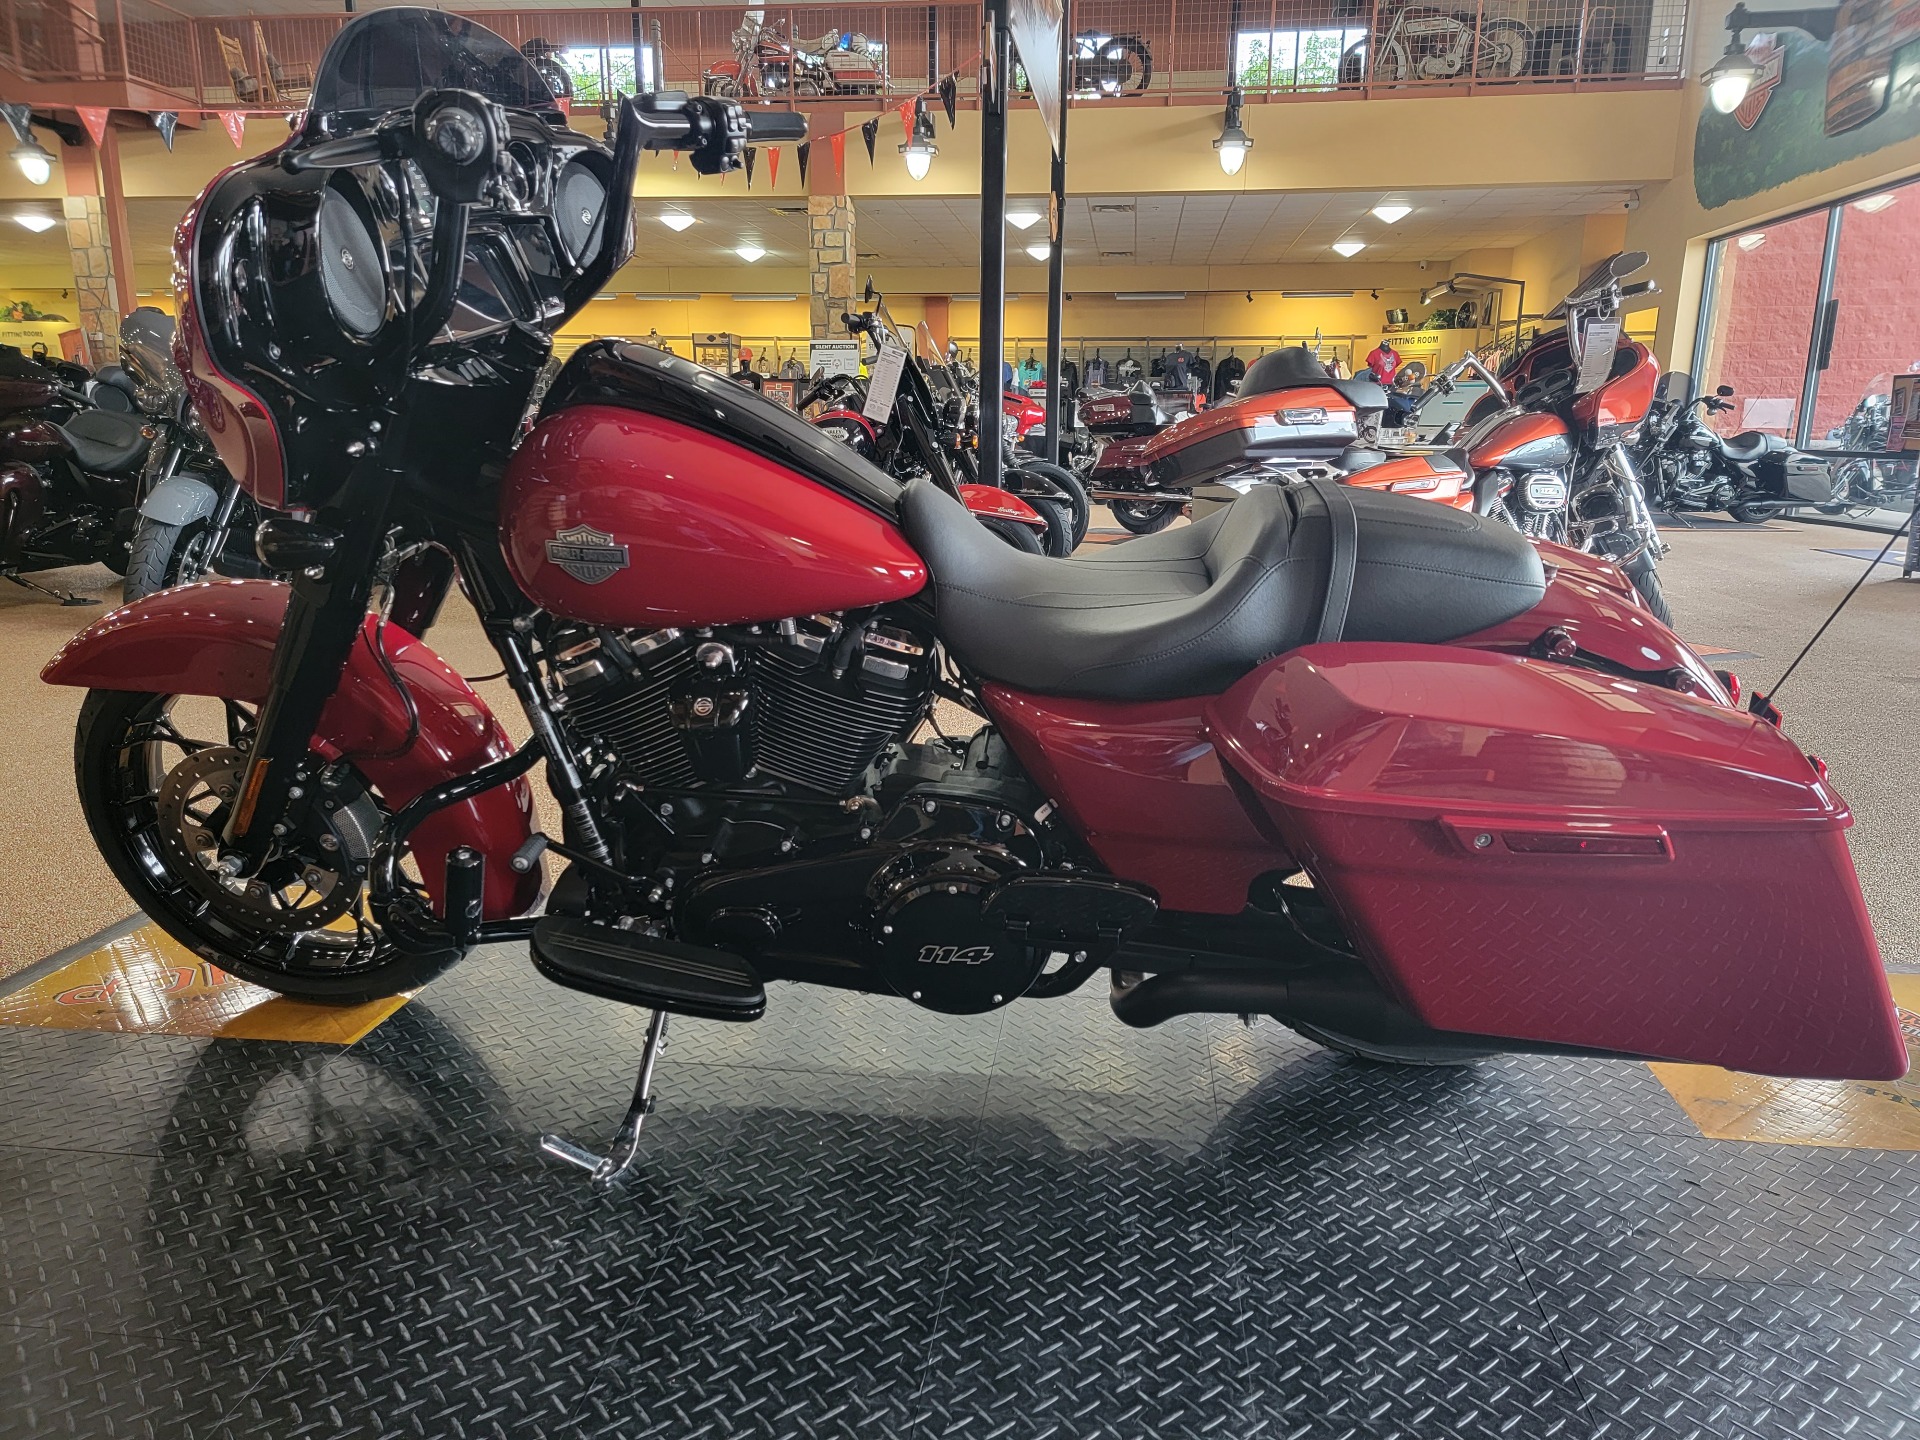 2021 Harley-Davidson Street Glide® Special in Knoxville, Tennessee - Photo 2